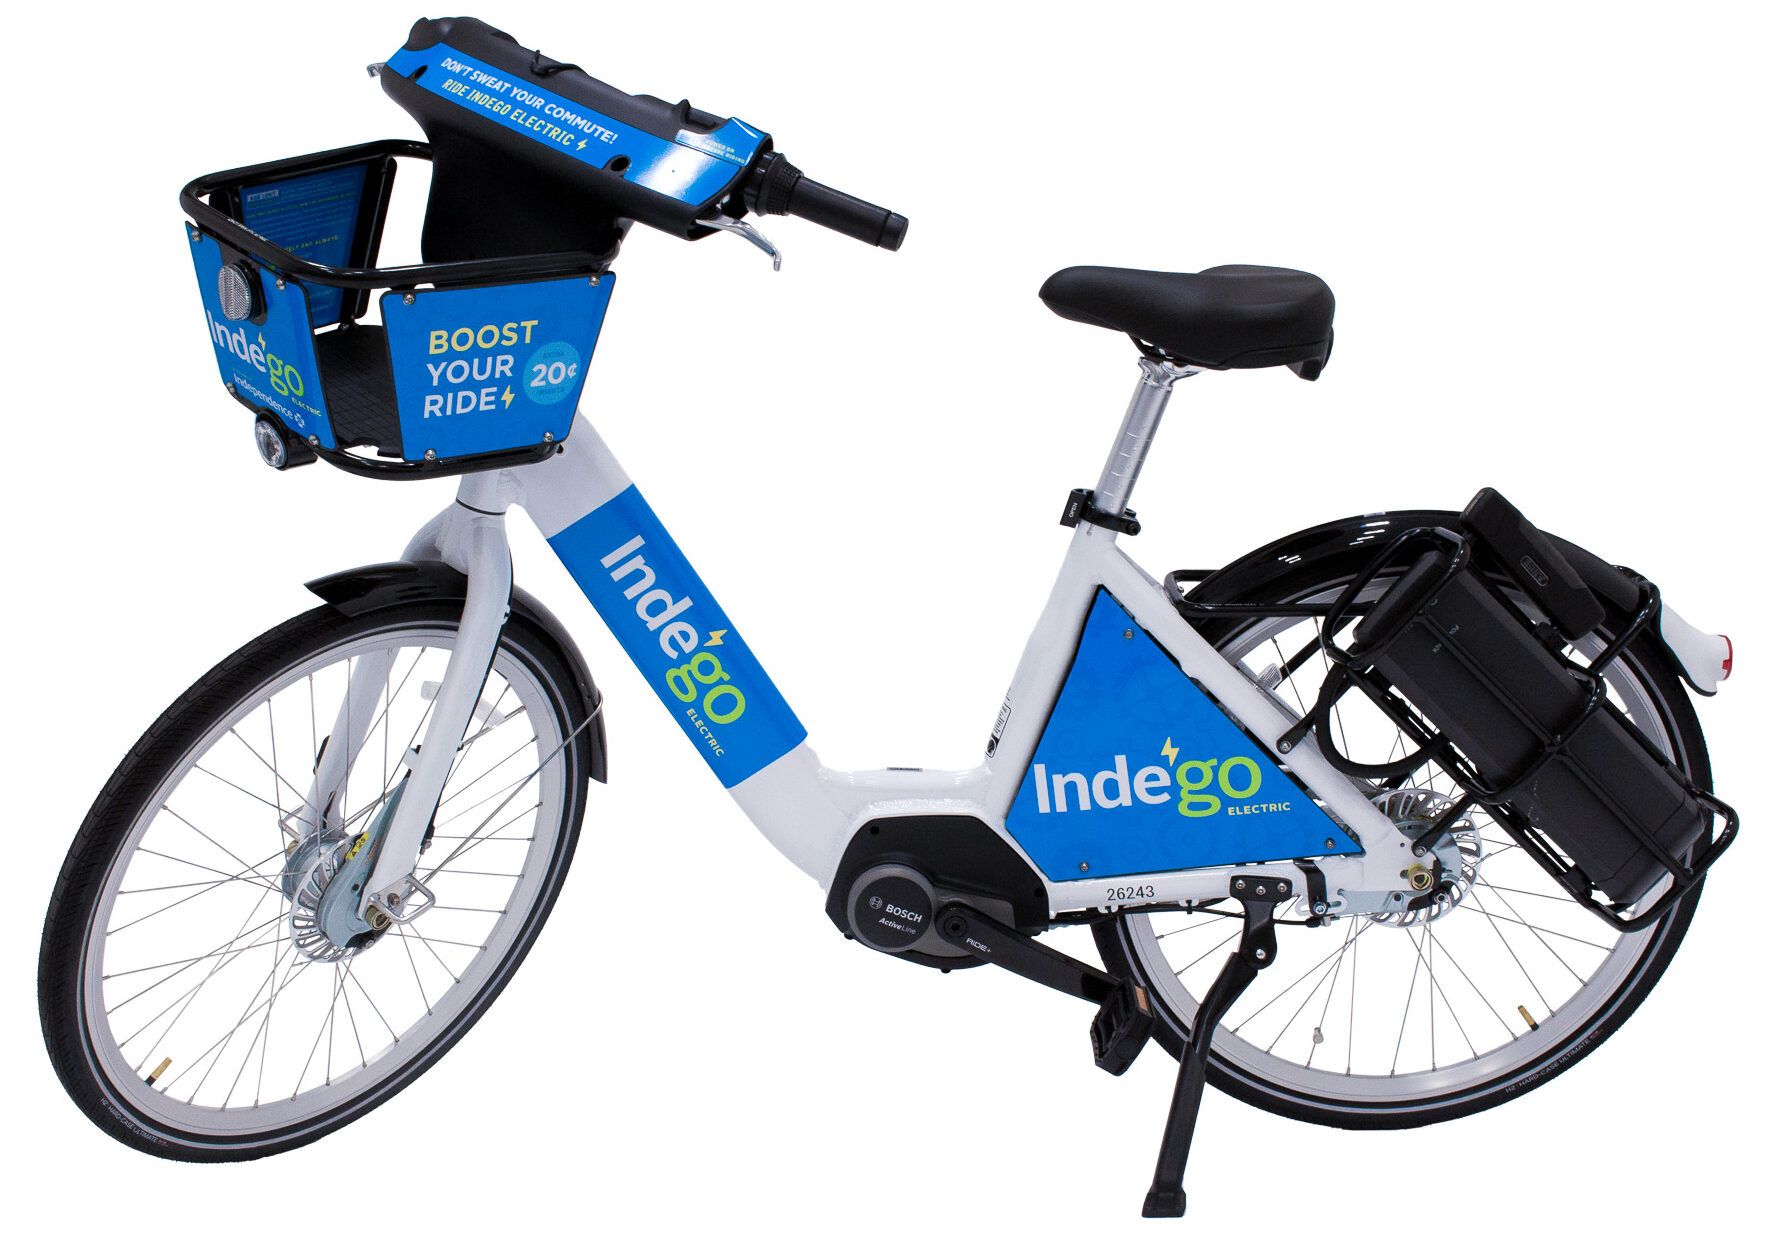 White Indego Electric